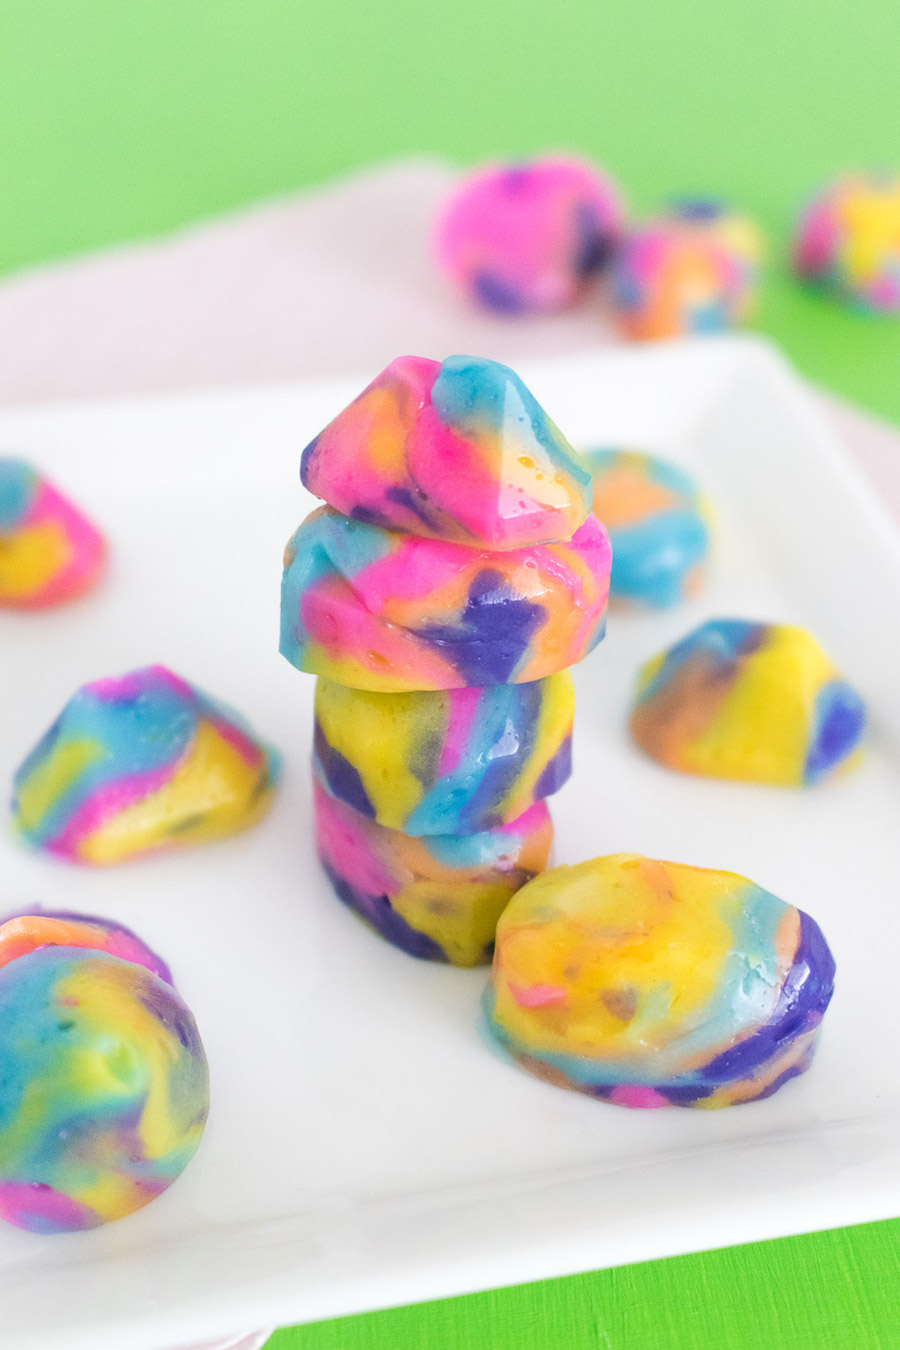 Edible St. Patrick's Day crafts for kids: Rainbow Butter Mints at Club Crafted